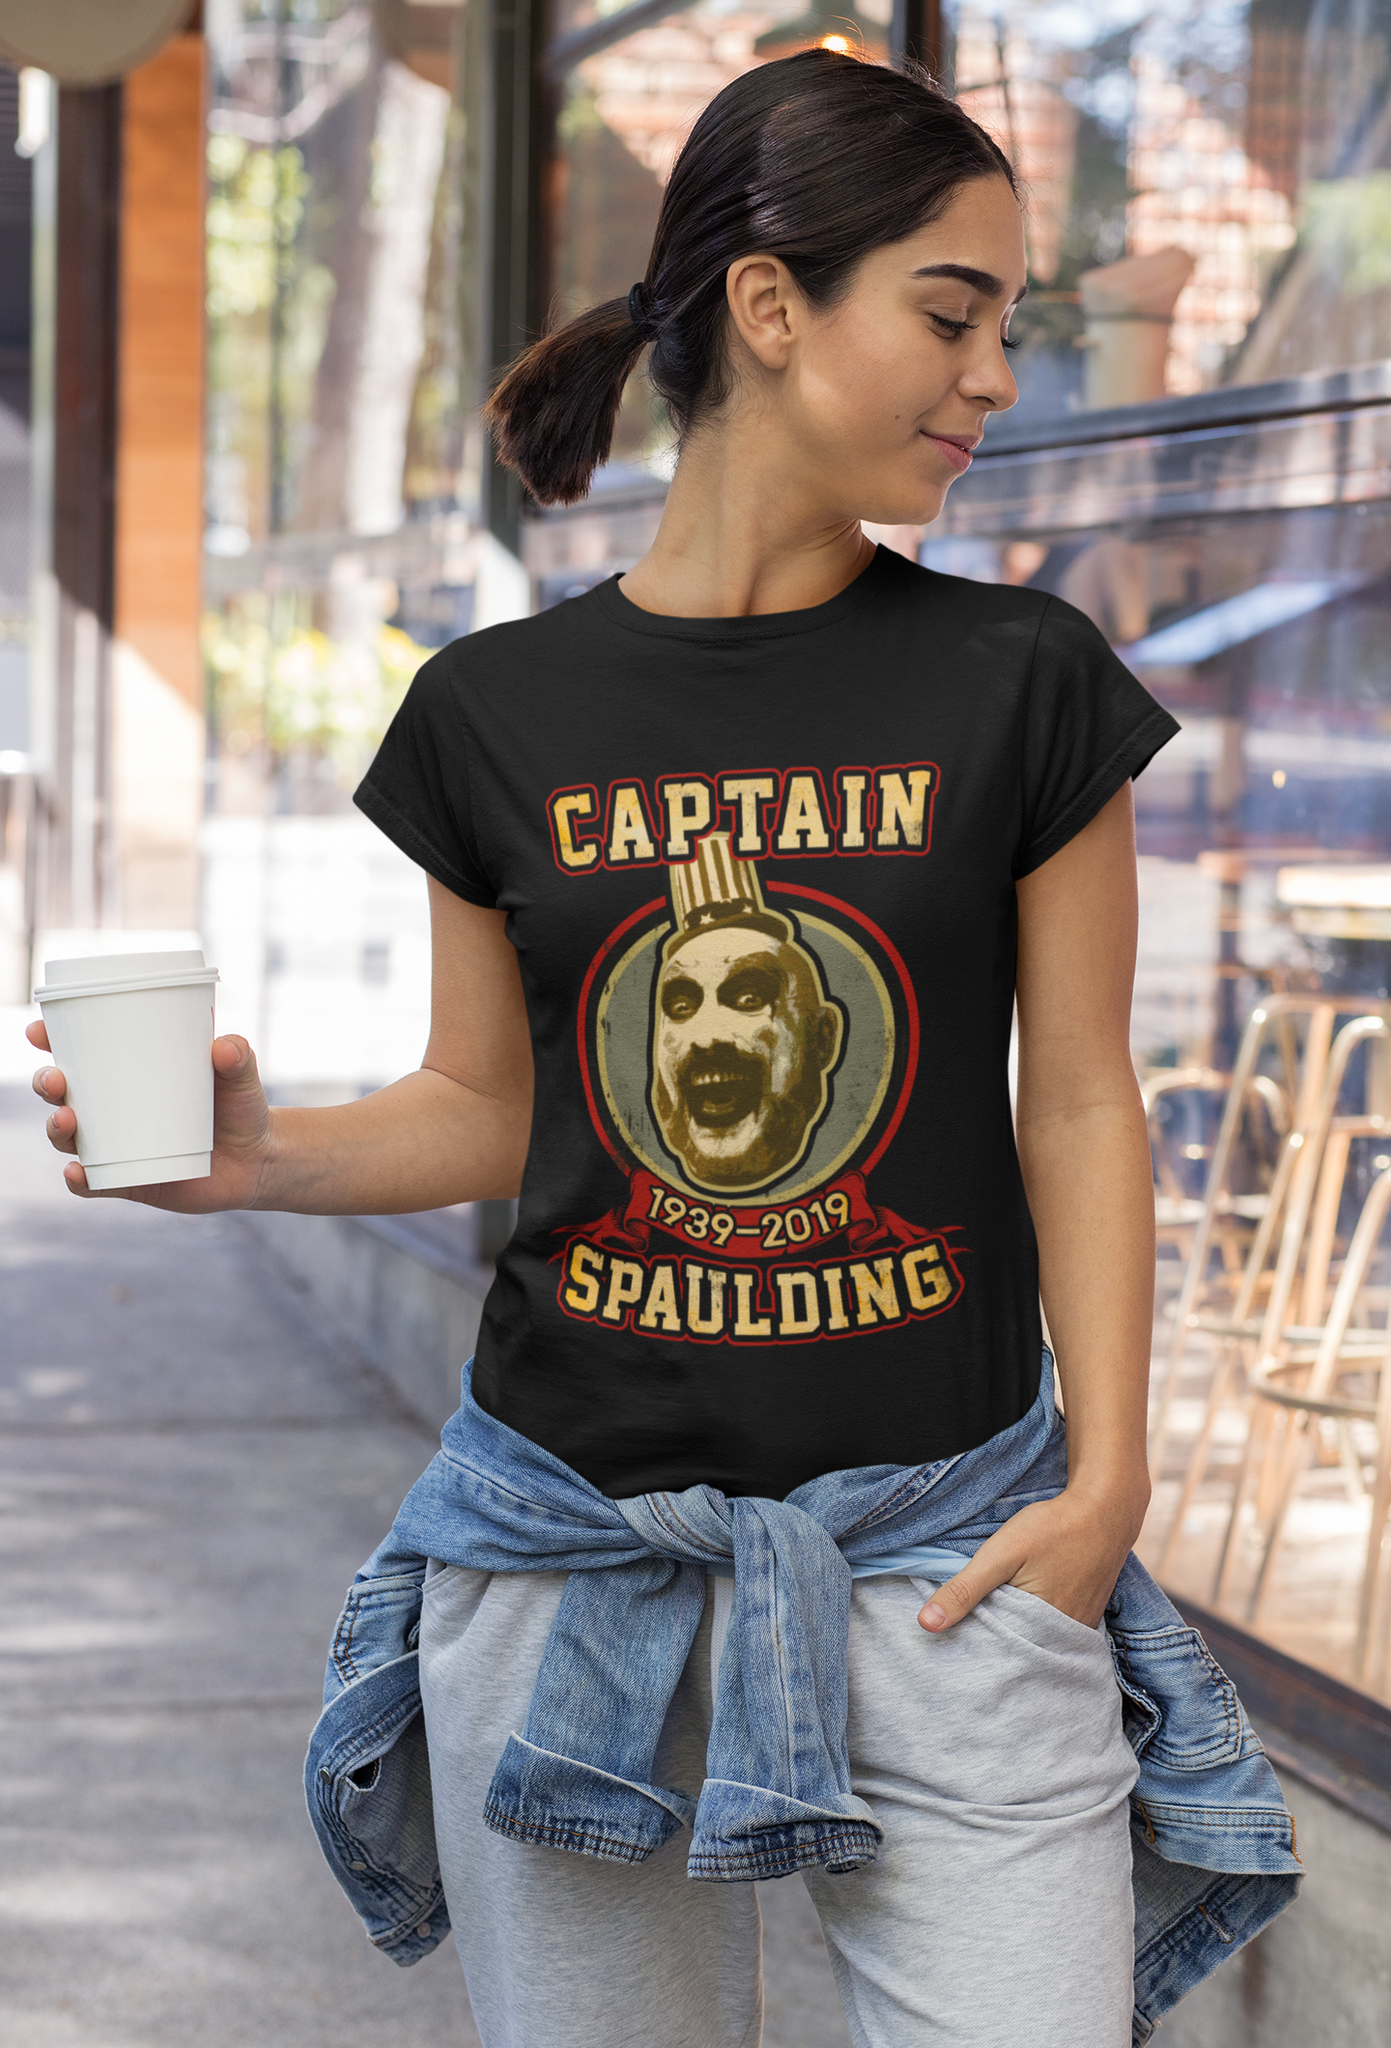 House Of 1000 Corpses T Shirt, Captain Spaulding 1939 2019 T Shirt, Halloween Gifts